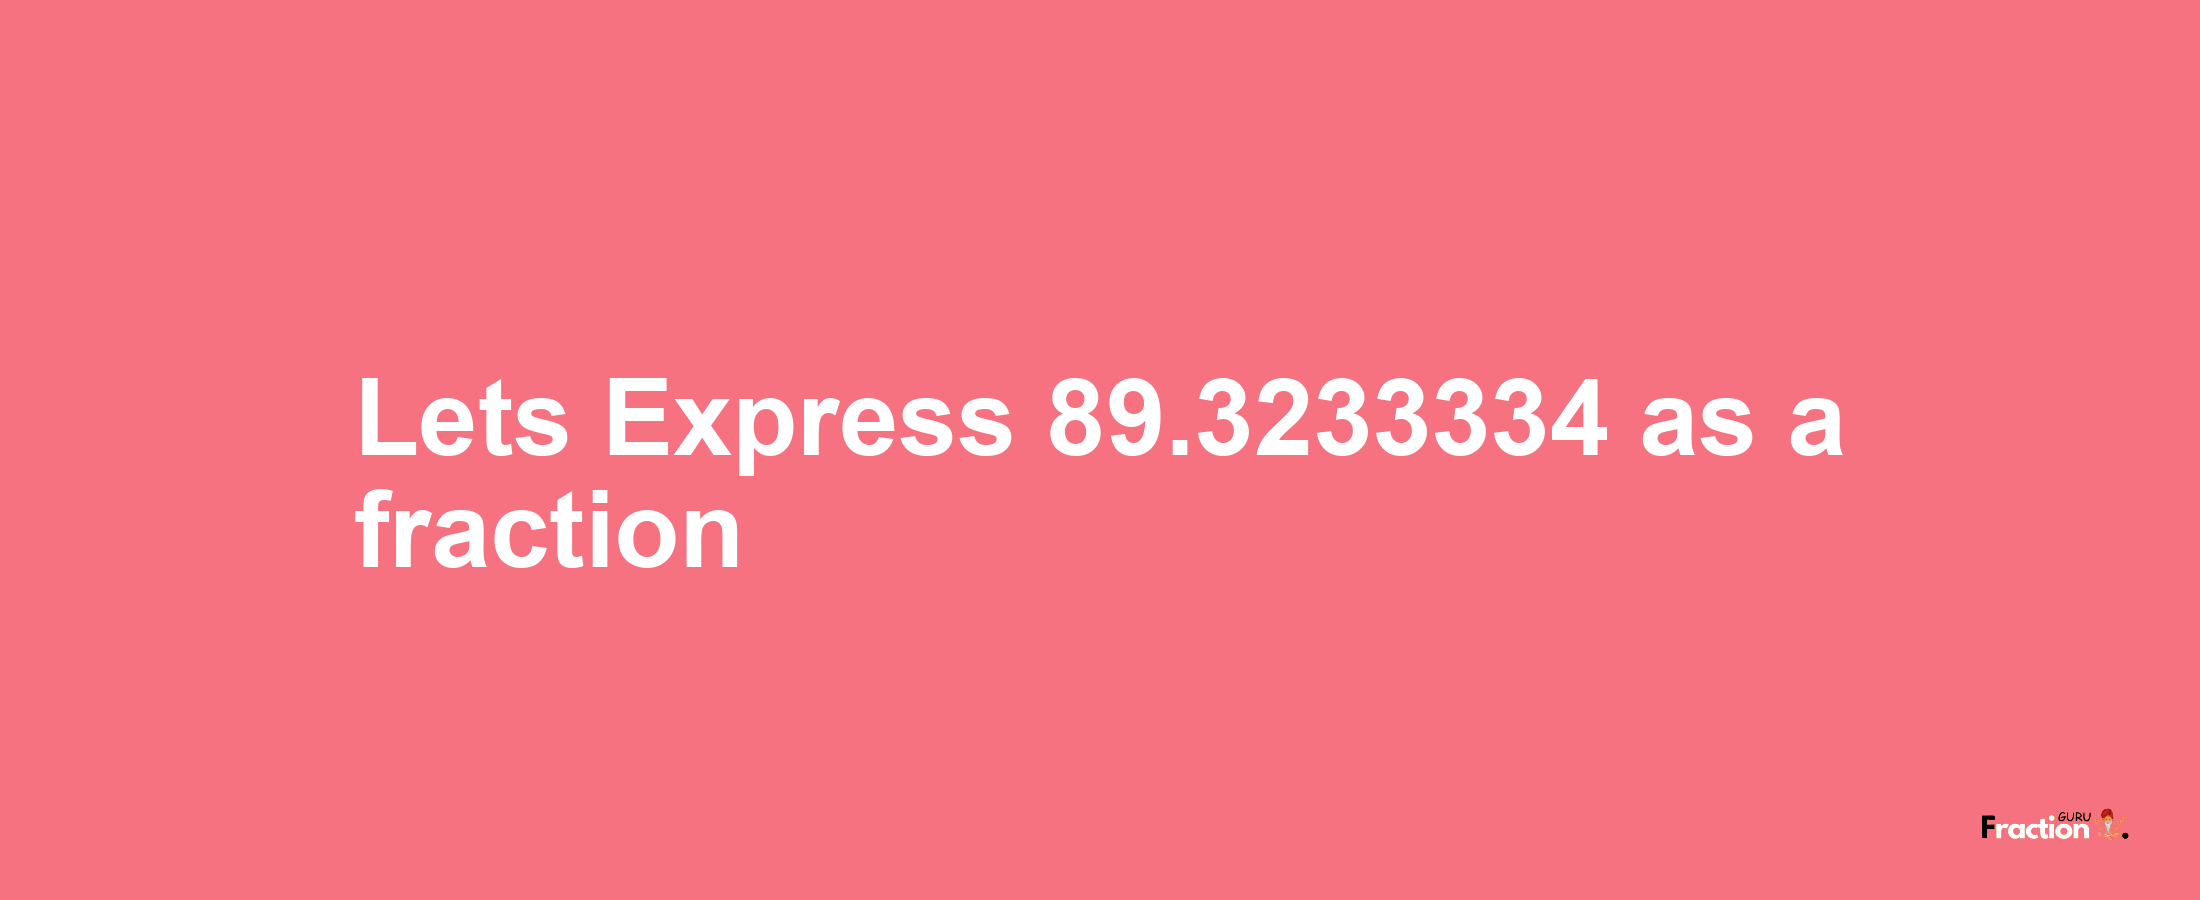 Lets Express 89.3233334 as afraction